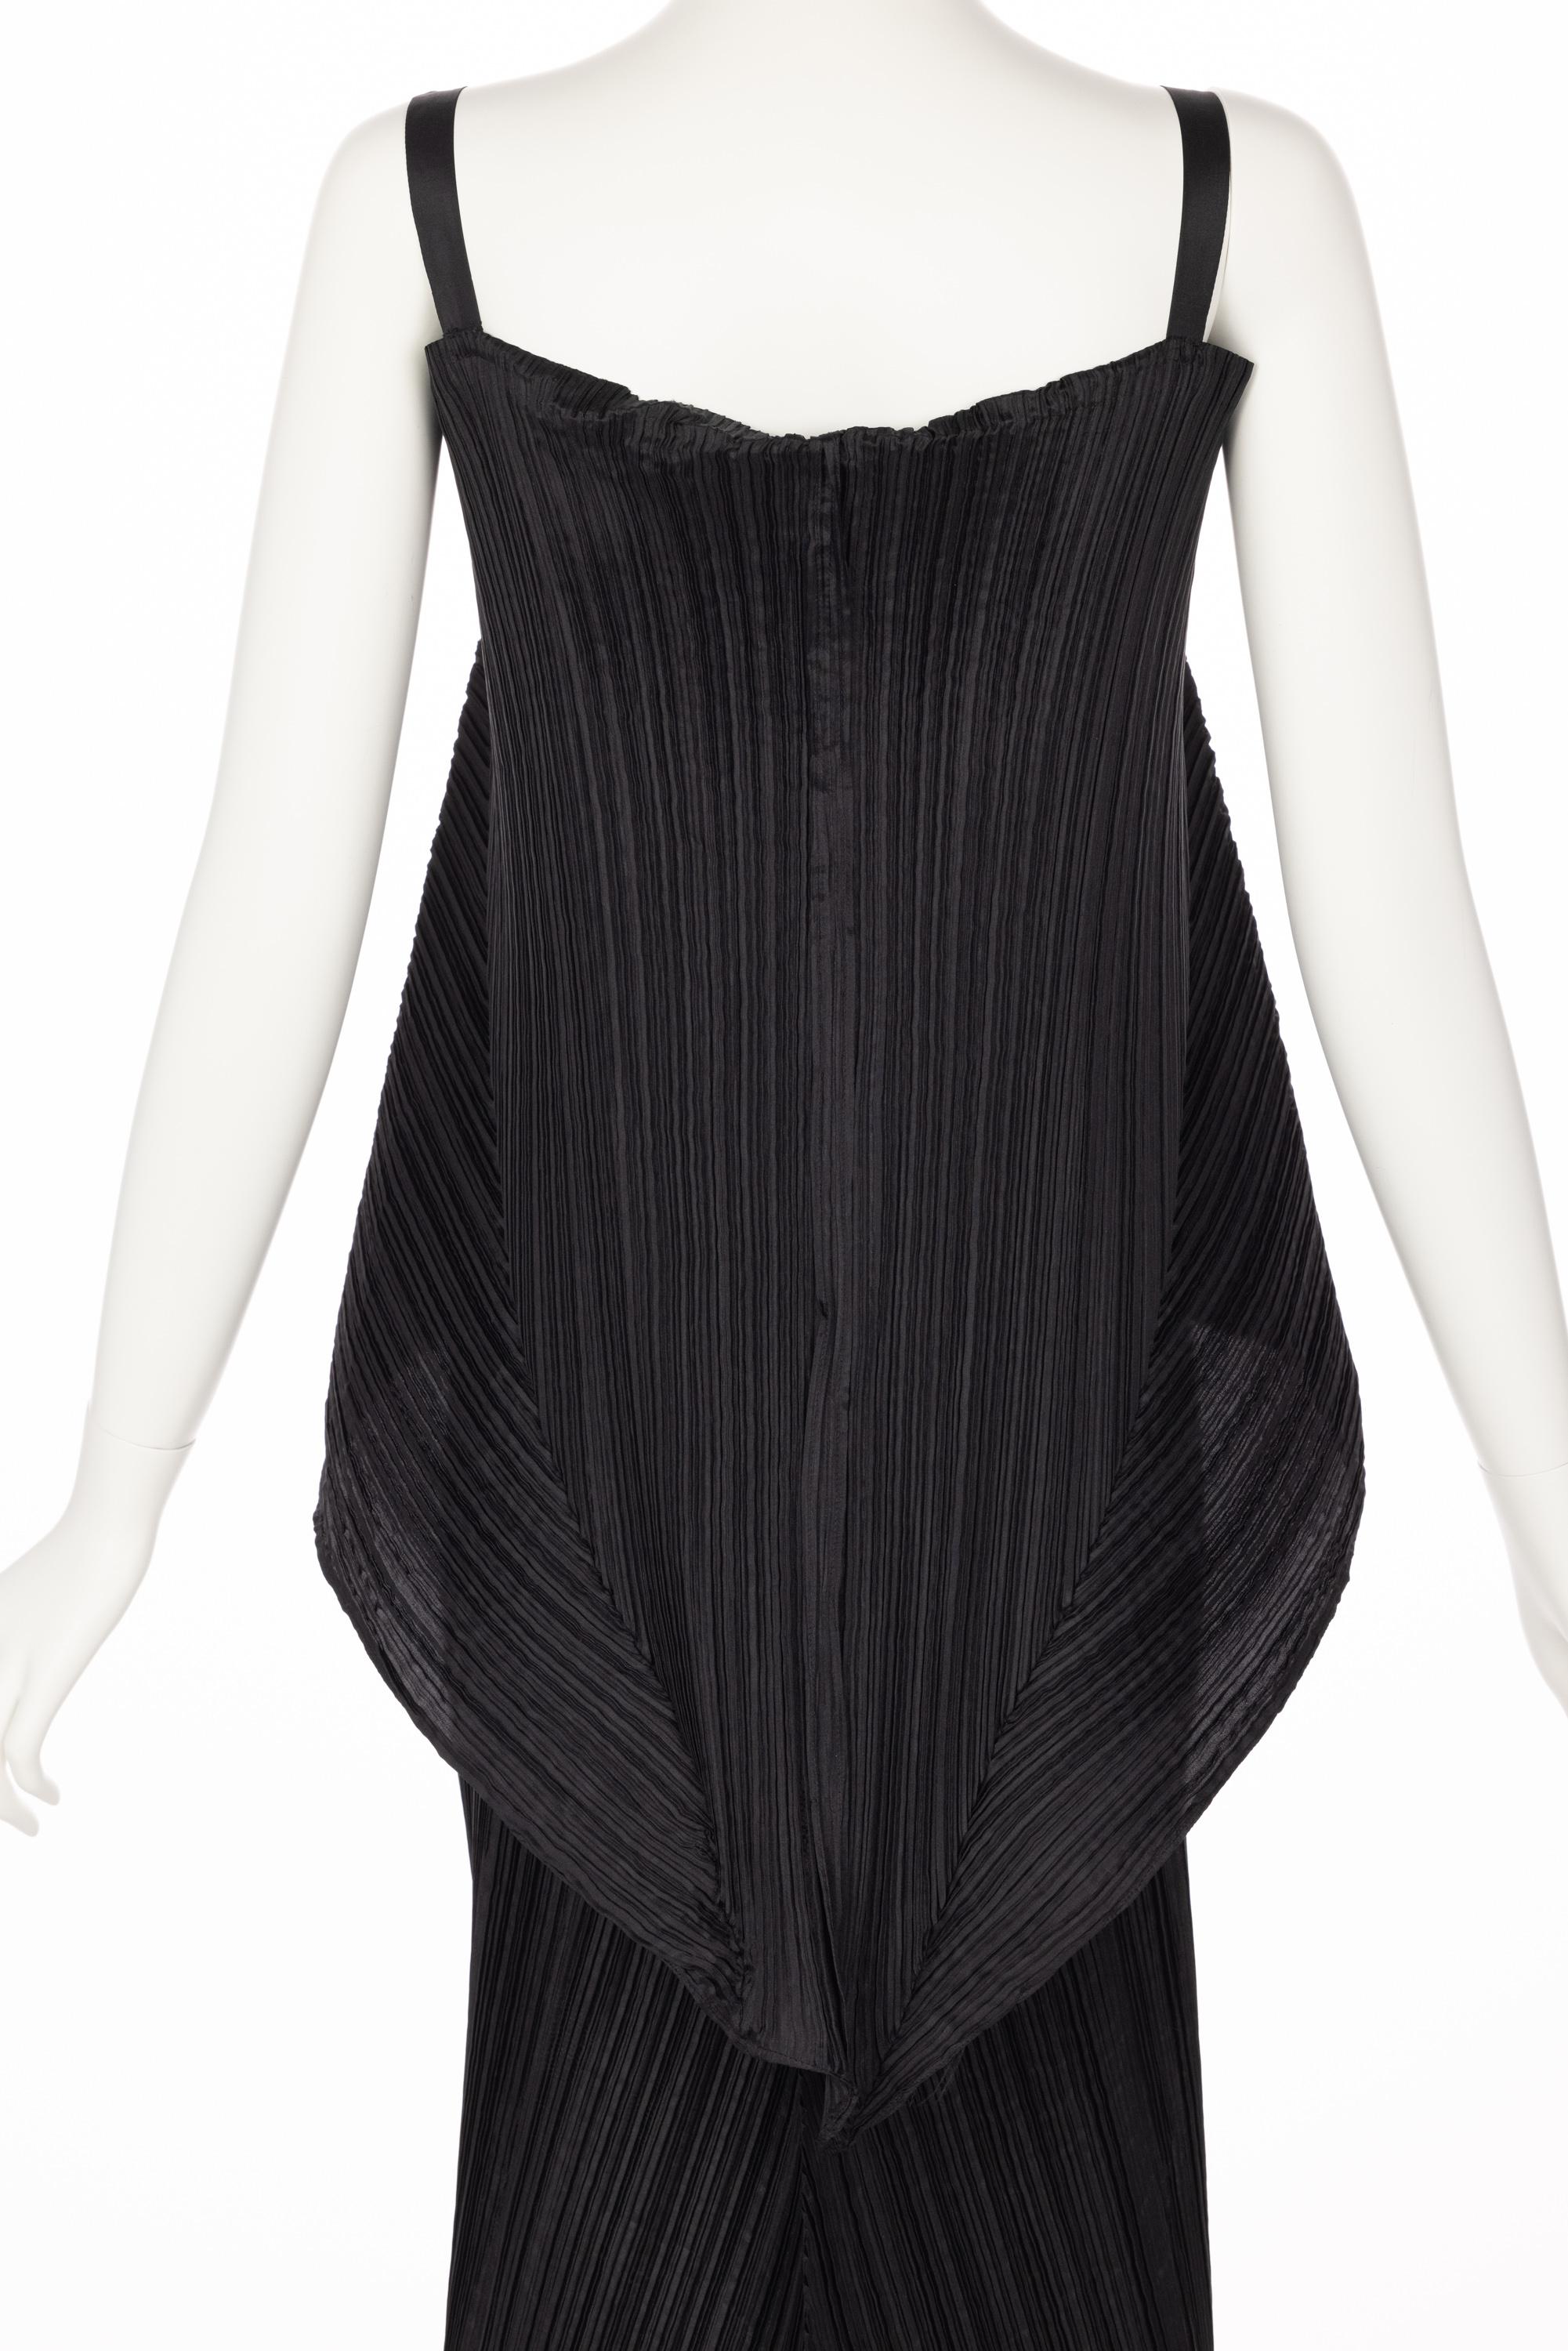 Issey Miyake Black Pleated Sculptural Sleeveless Maxi Dress, 1990s For Sale 5